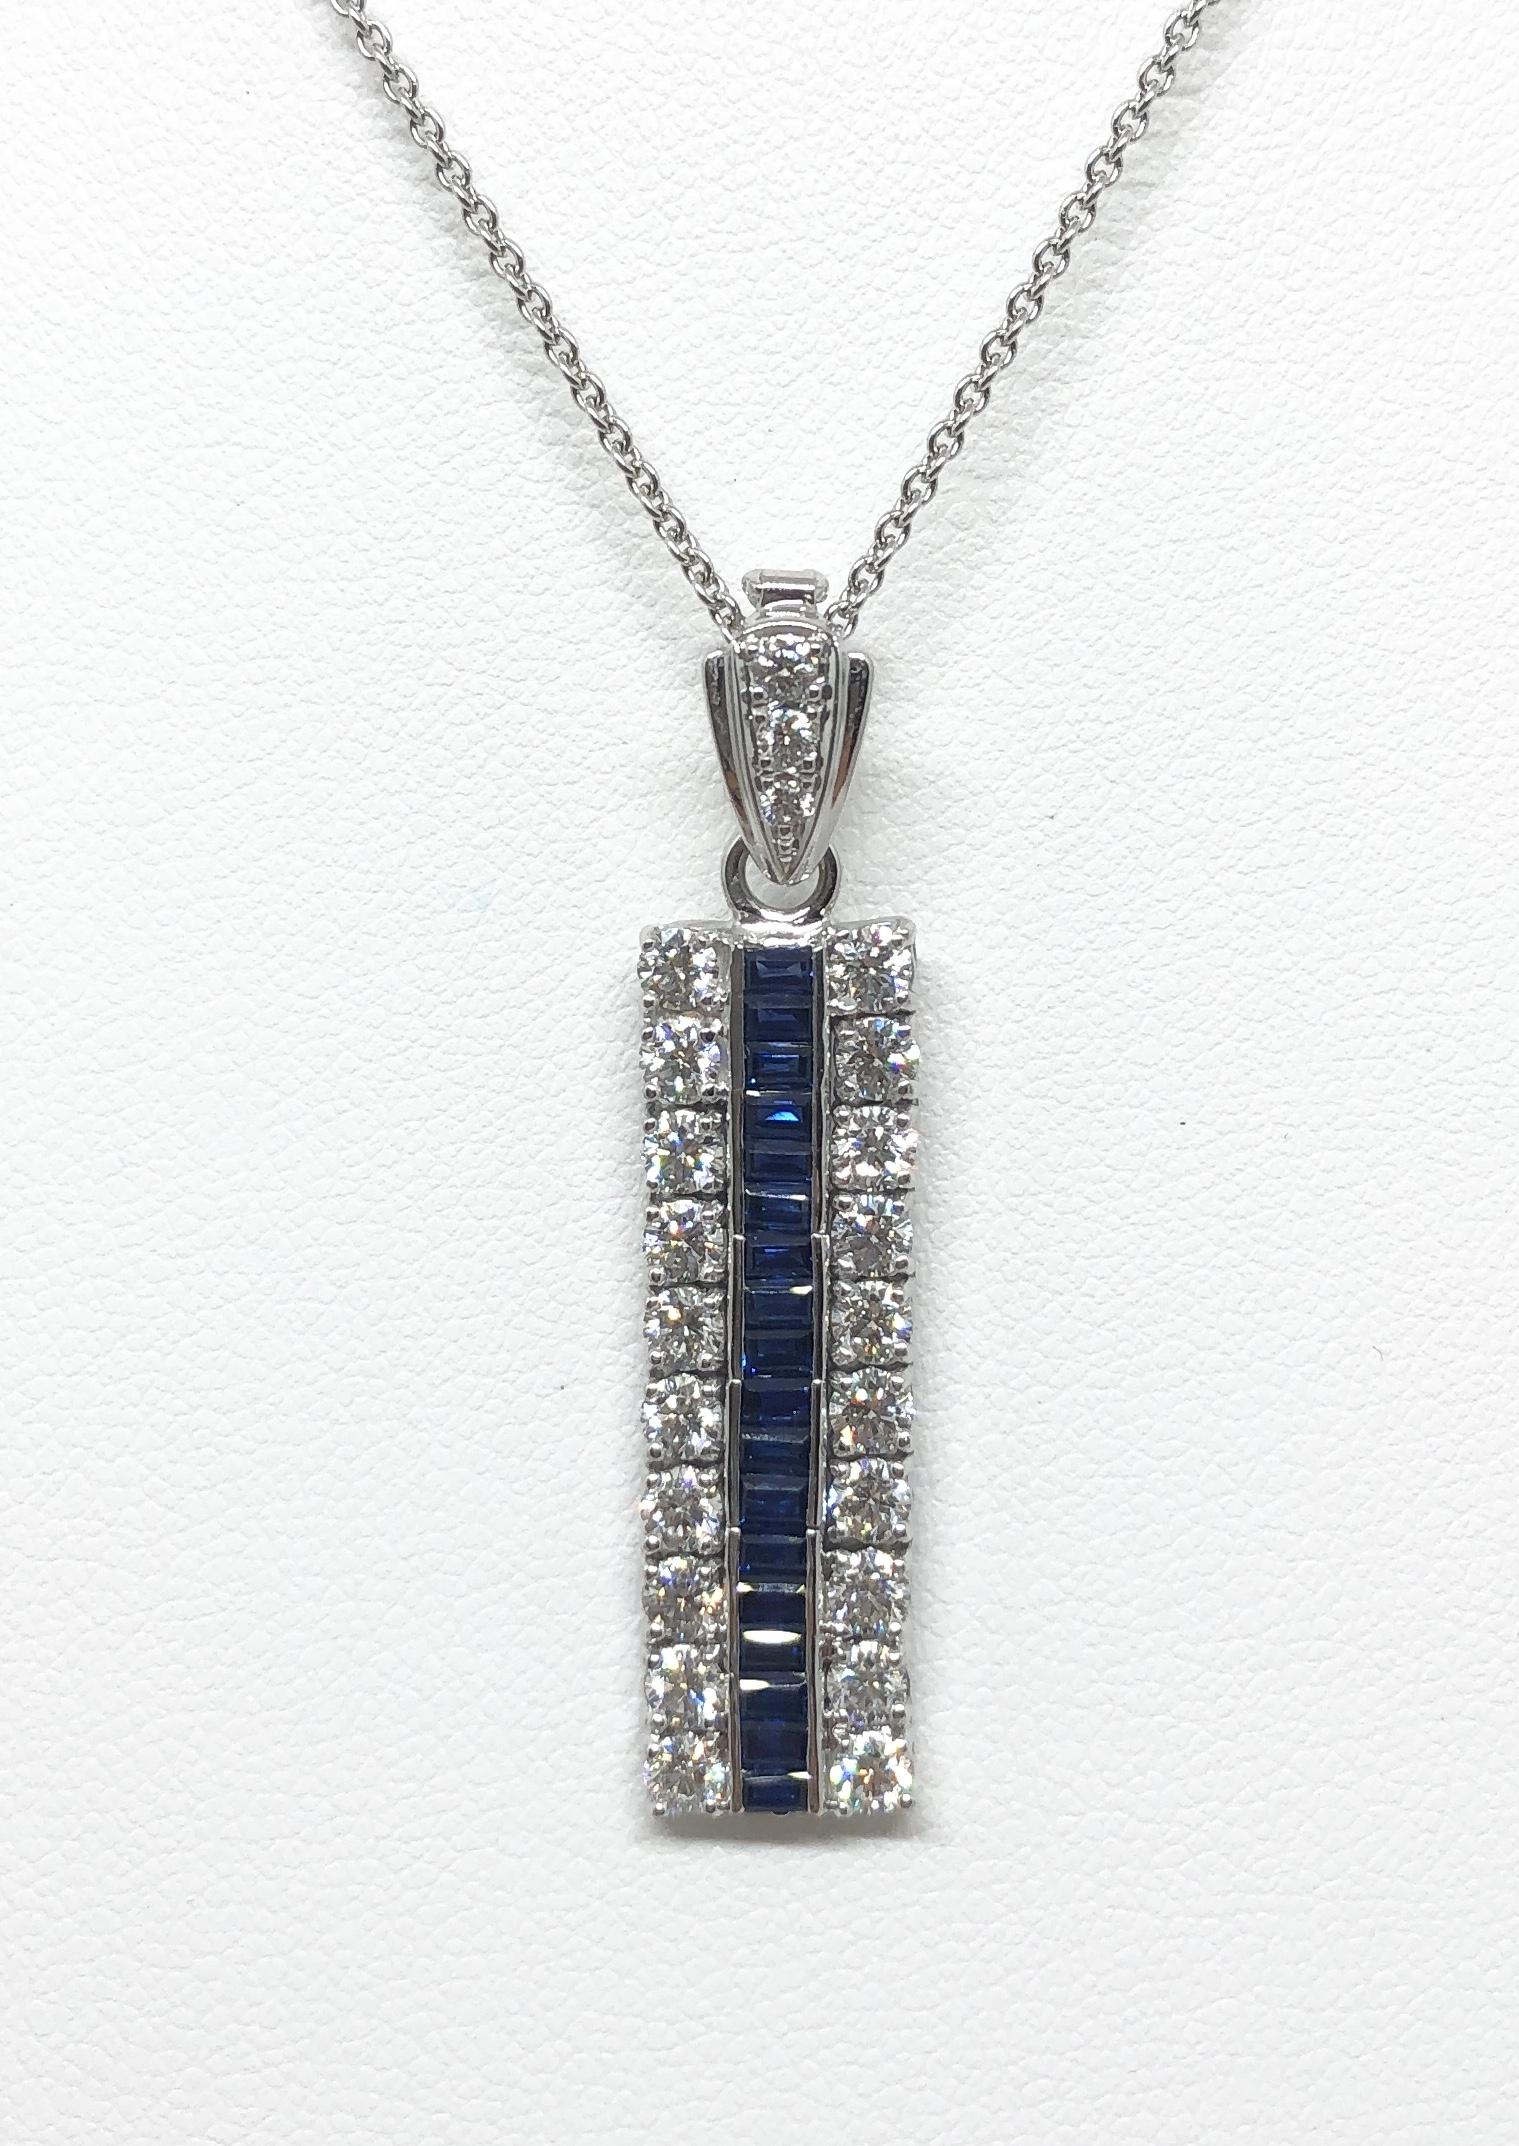 Blue Sapphire 0.75 carat with Diamond 1.30 carats Pendant set in 18 Karat White Gold Settings
(chain not included)

Width: 0.9 cm 
Length: 4.0 cm
Total Weight: 6.92 grams

